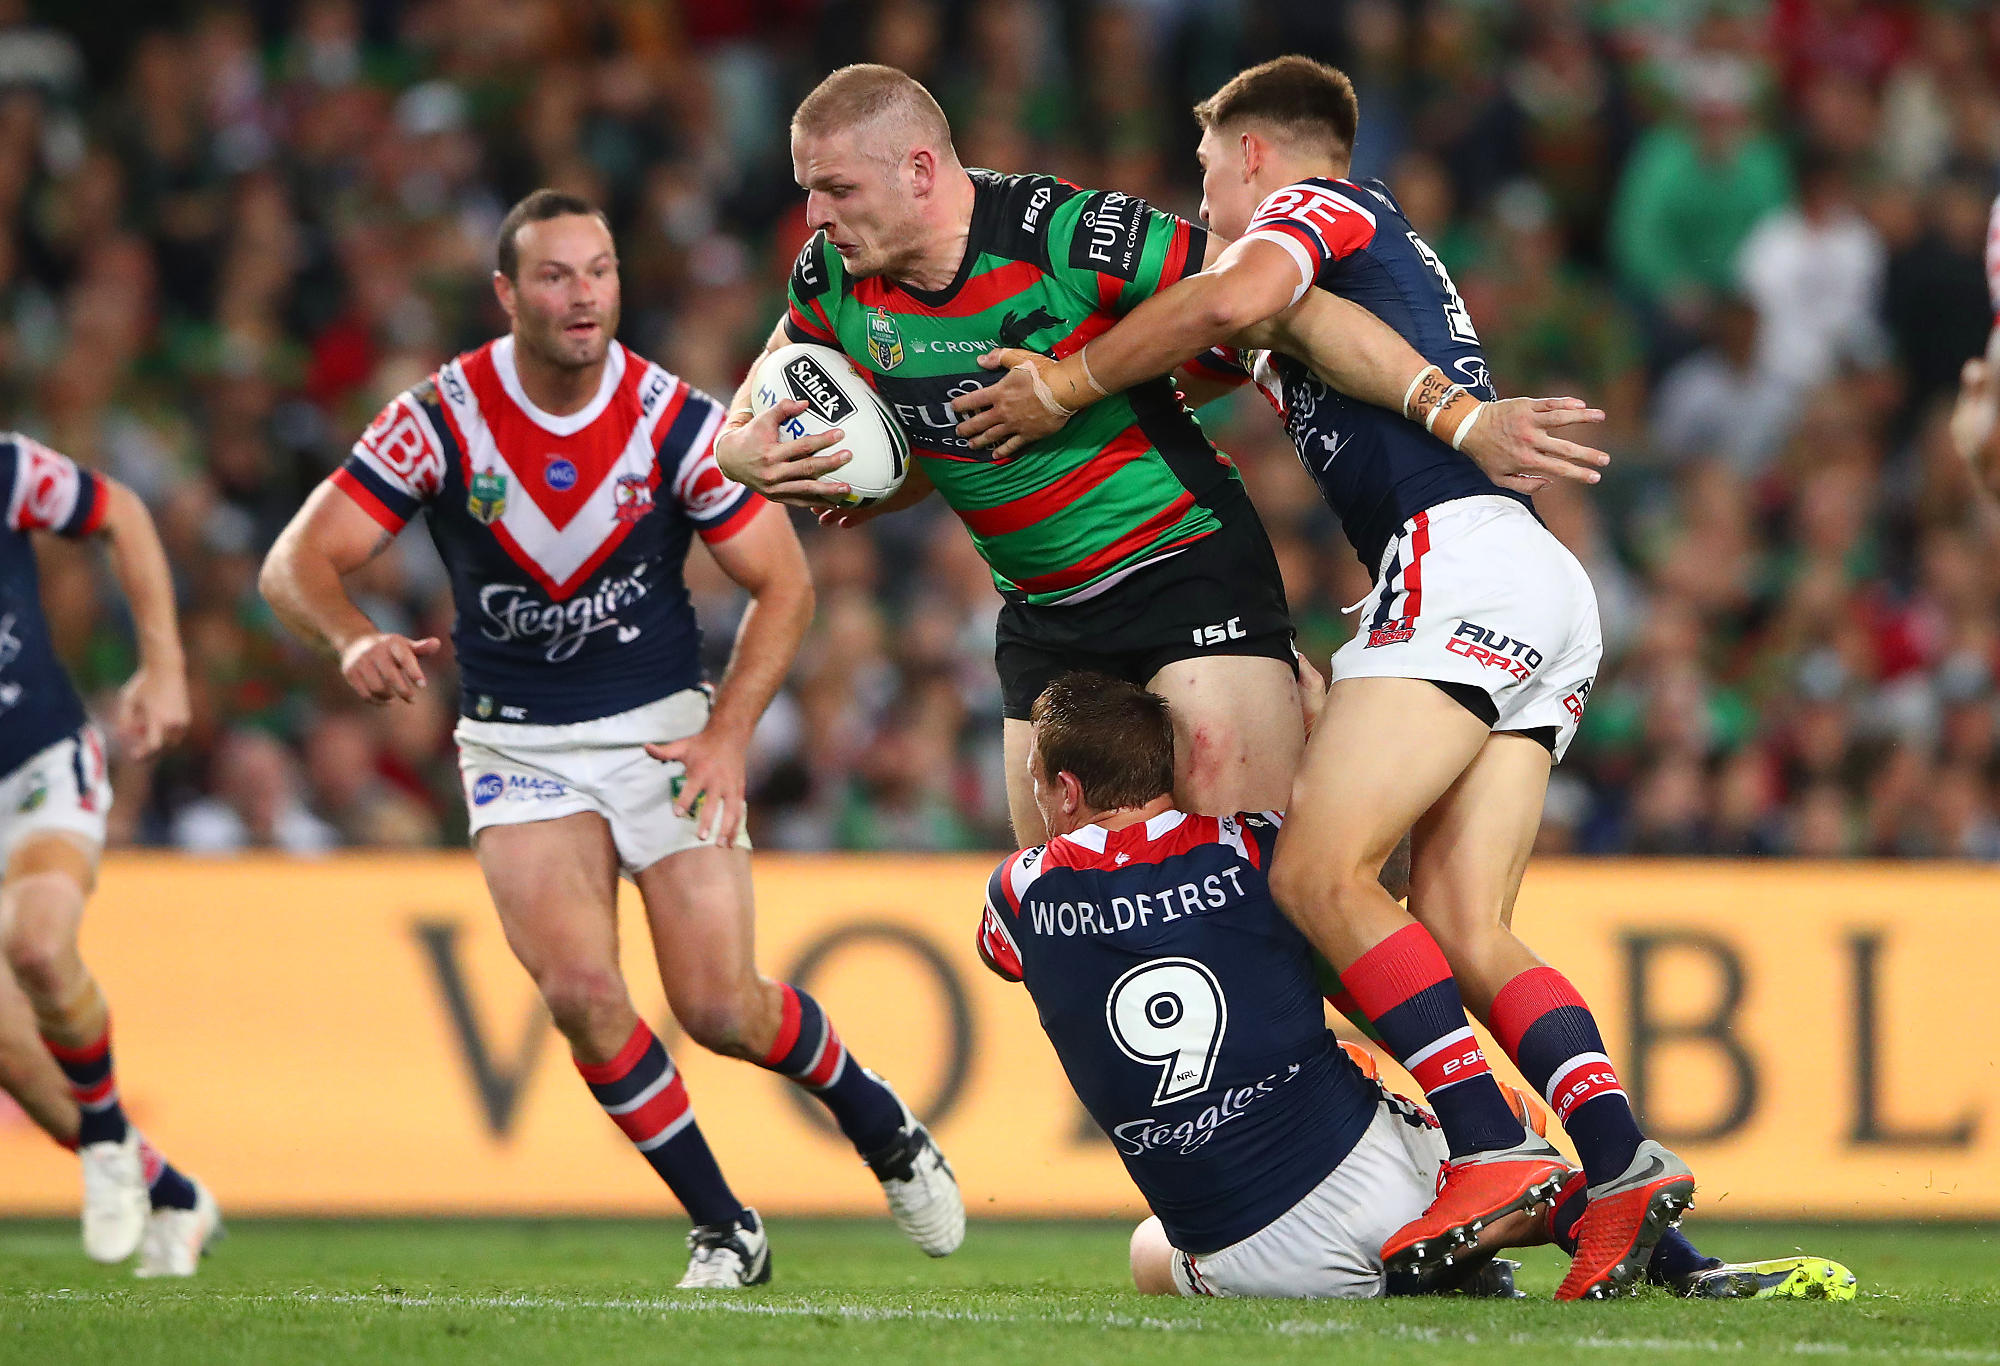 George Burgess of the Rabbitohs is tackled during the NRL Preliminary Final match between the Sydney Roosters and the South Sydney Rabbitohs at Allianz Stadium on September 22, 2018 in Sydney, Australia.